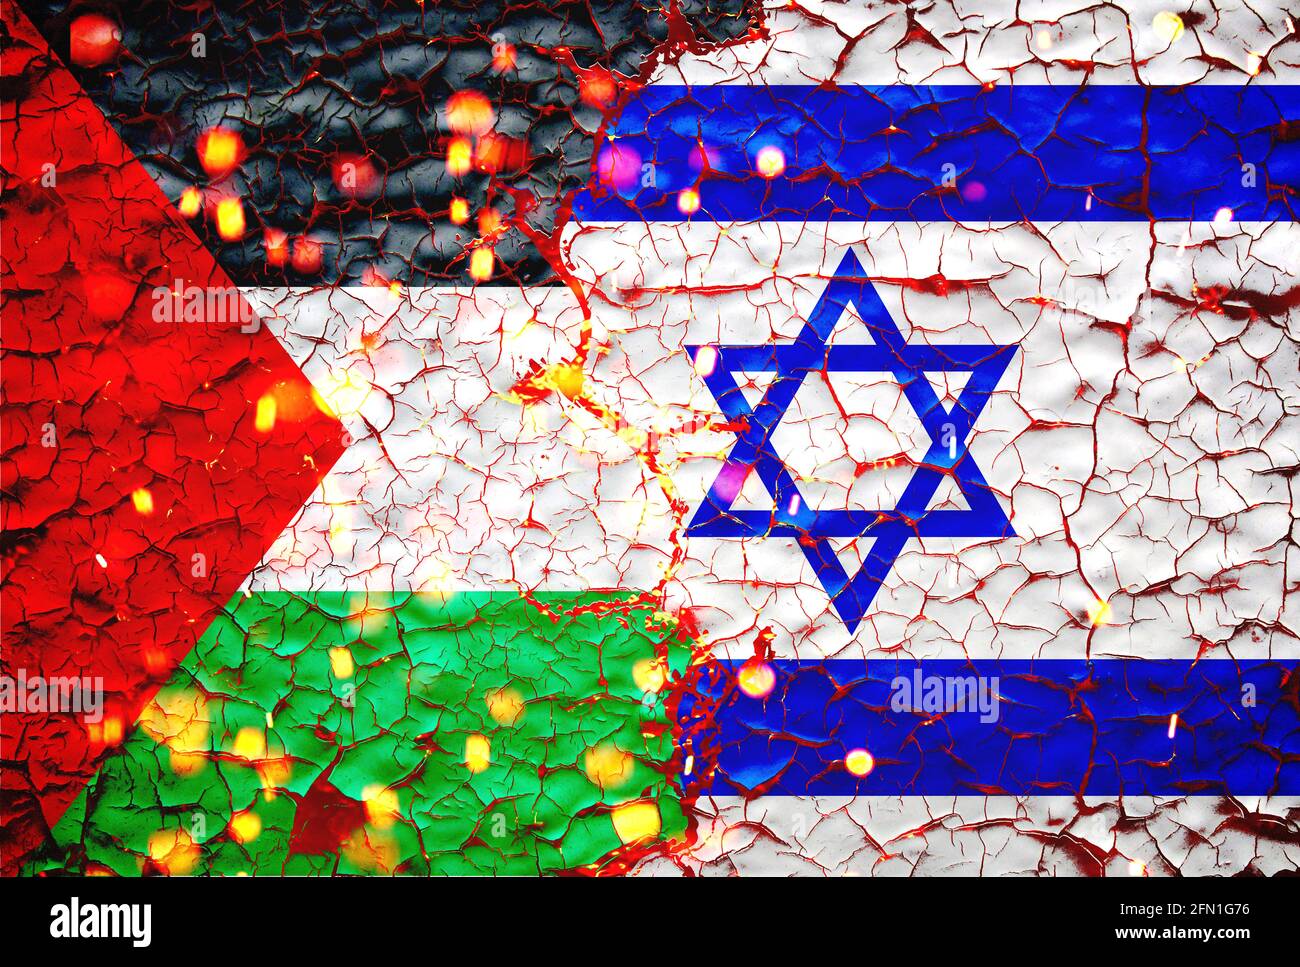 israel and palestine flags painted over cracked concrete wall.And lava flows behind.israel vs palestine war. Stock Photo